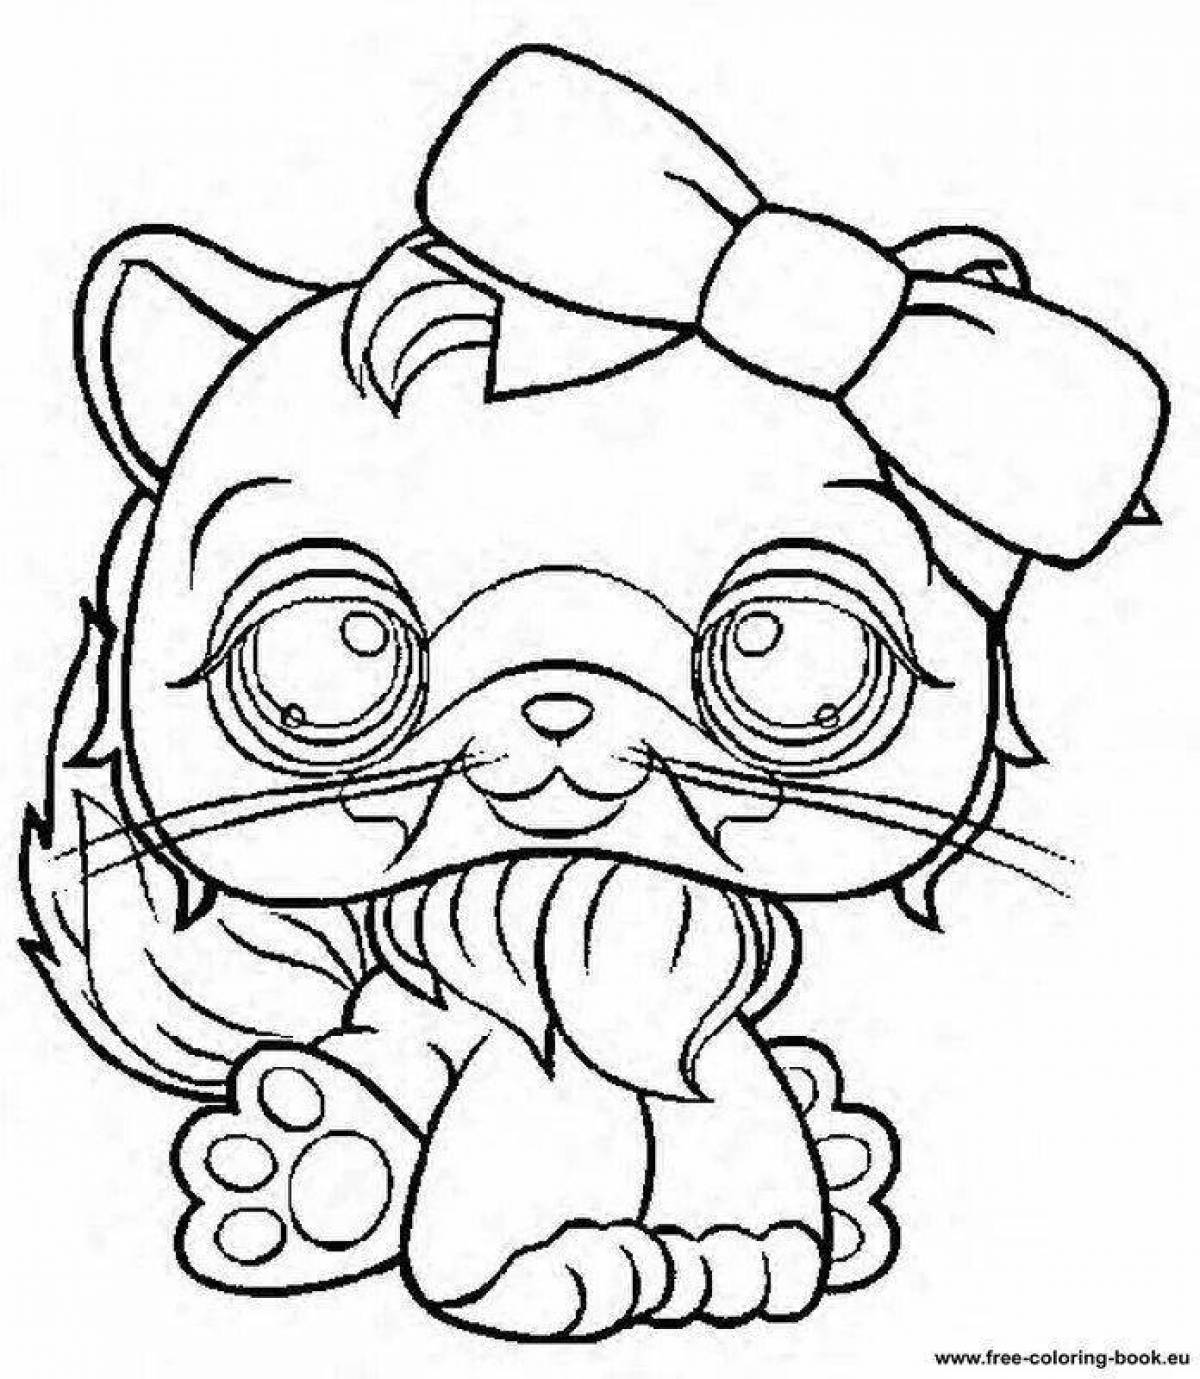 Dazzling lps coloring page